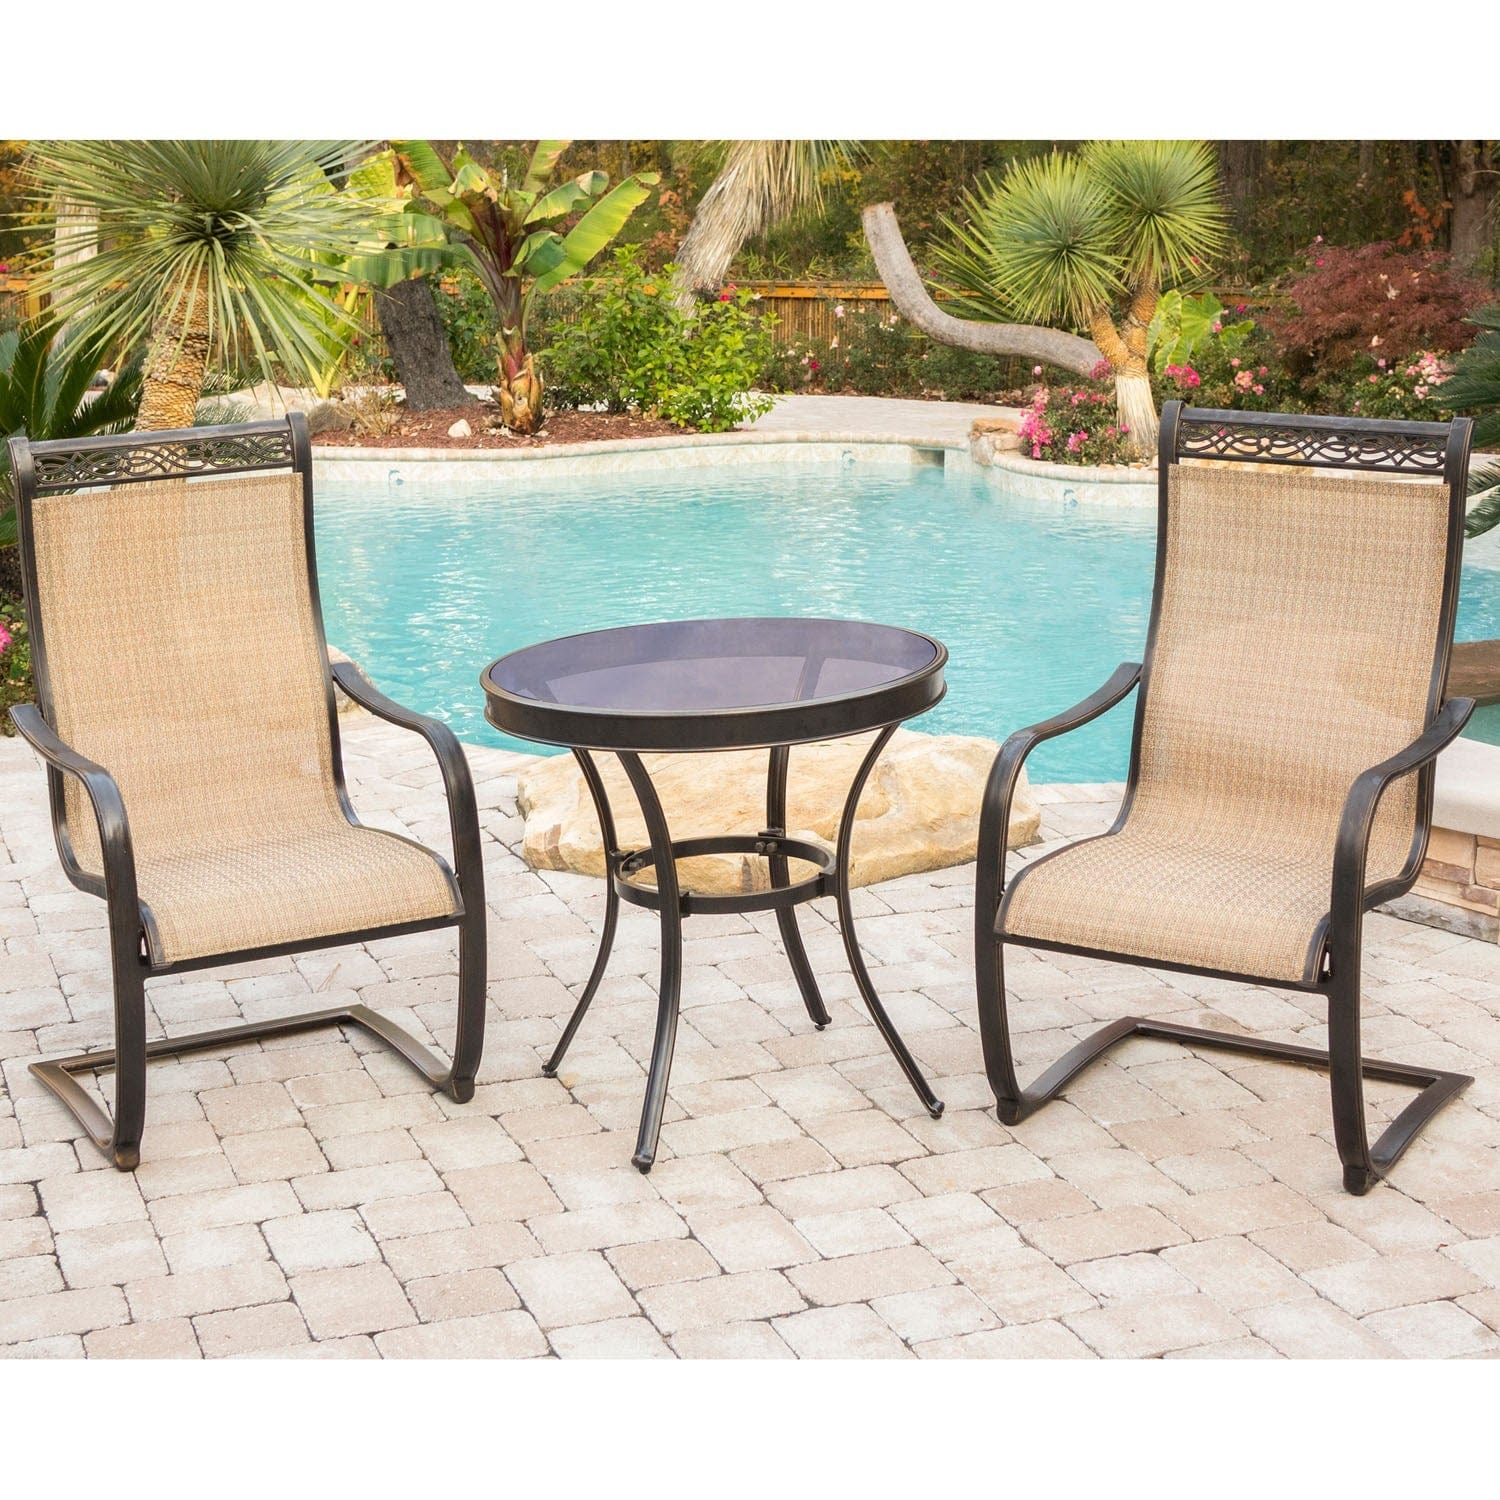 Hanover Bistro Set Hanover Monaco 3-Piece Bistro Set with Spring Sling Chairs | 30" Glass Top Table - Tan Sling/Glass | MONDN3PCSPG